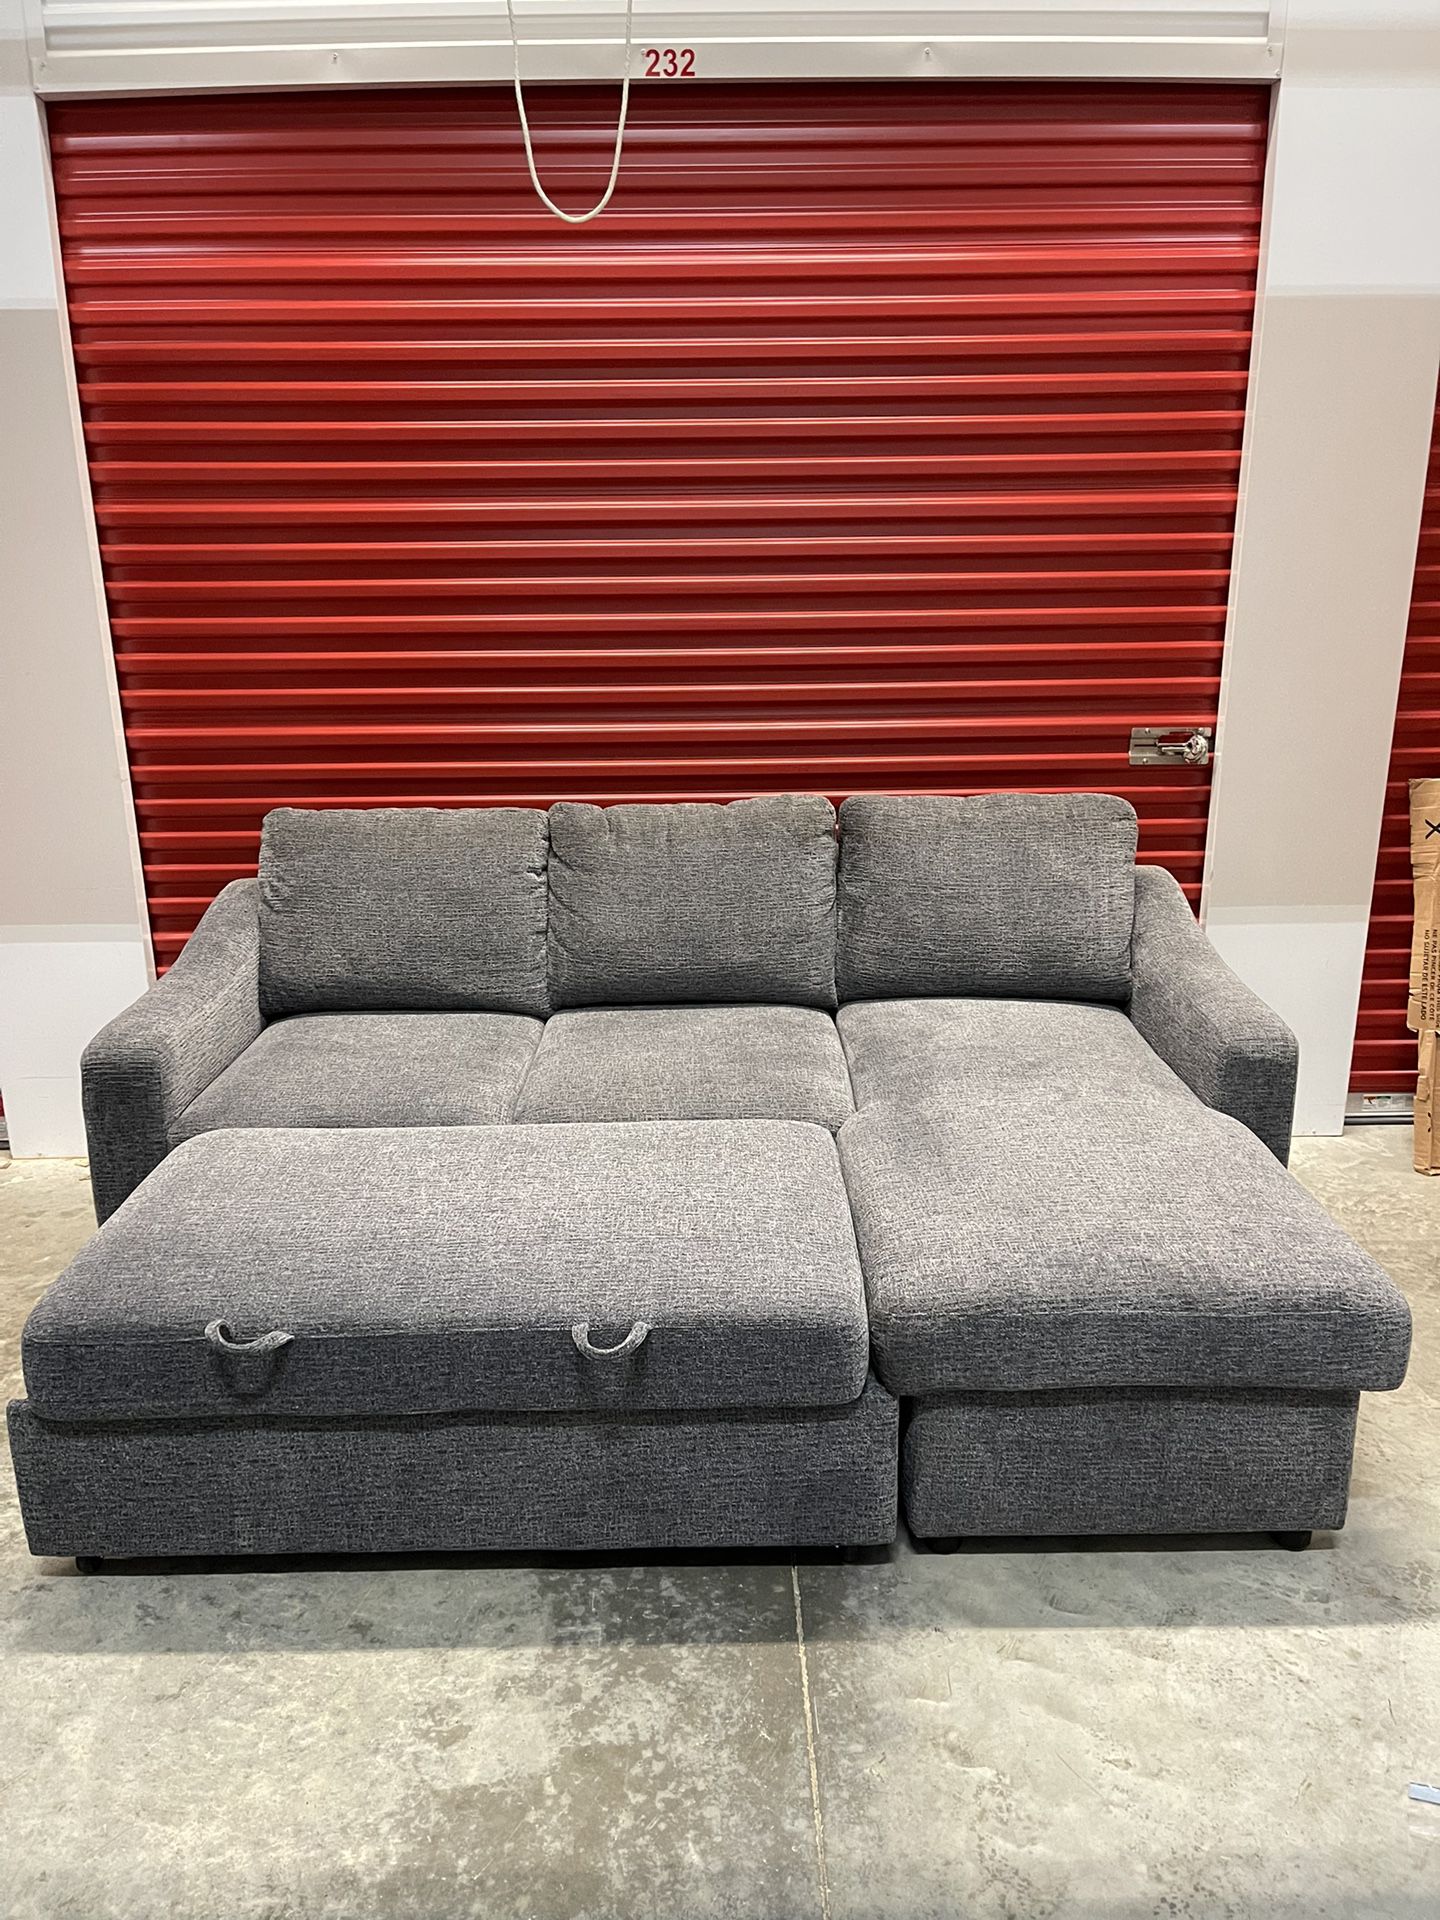 BRAND NEW! Coddle Aria Fabric Sleeper Sofa | Free Delivery & Install